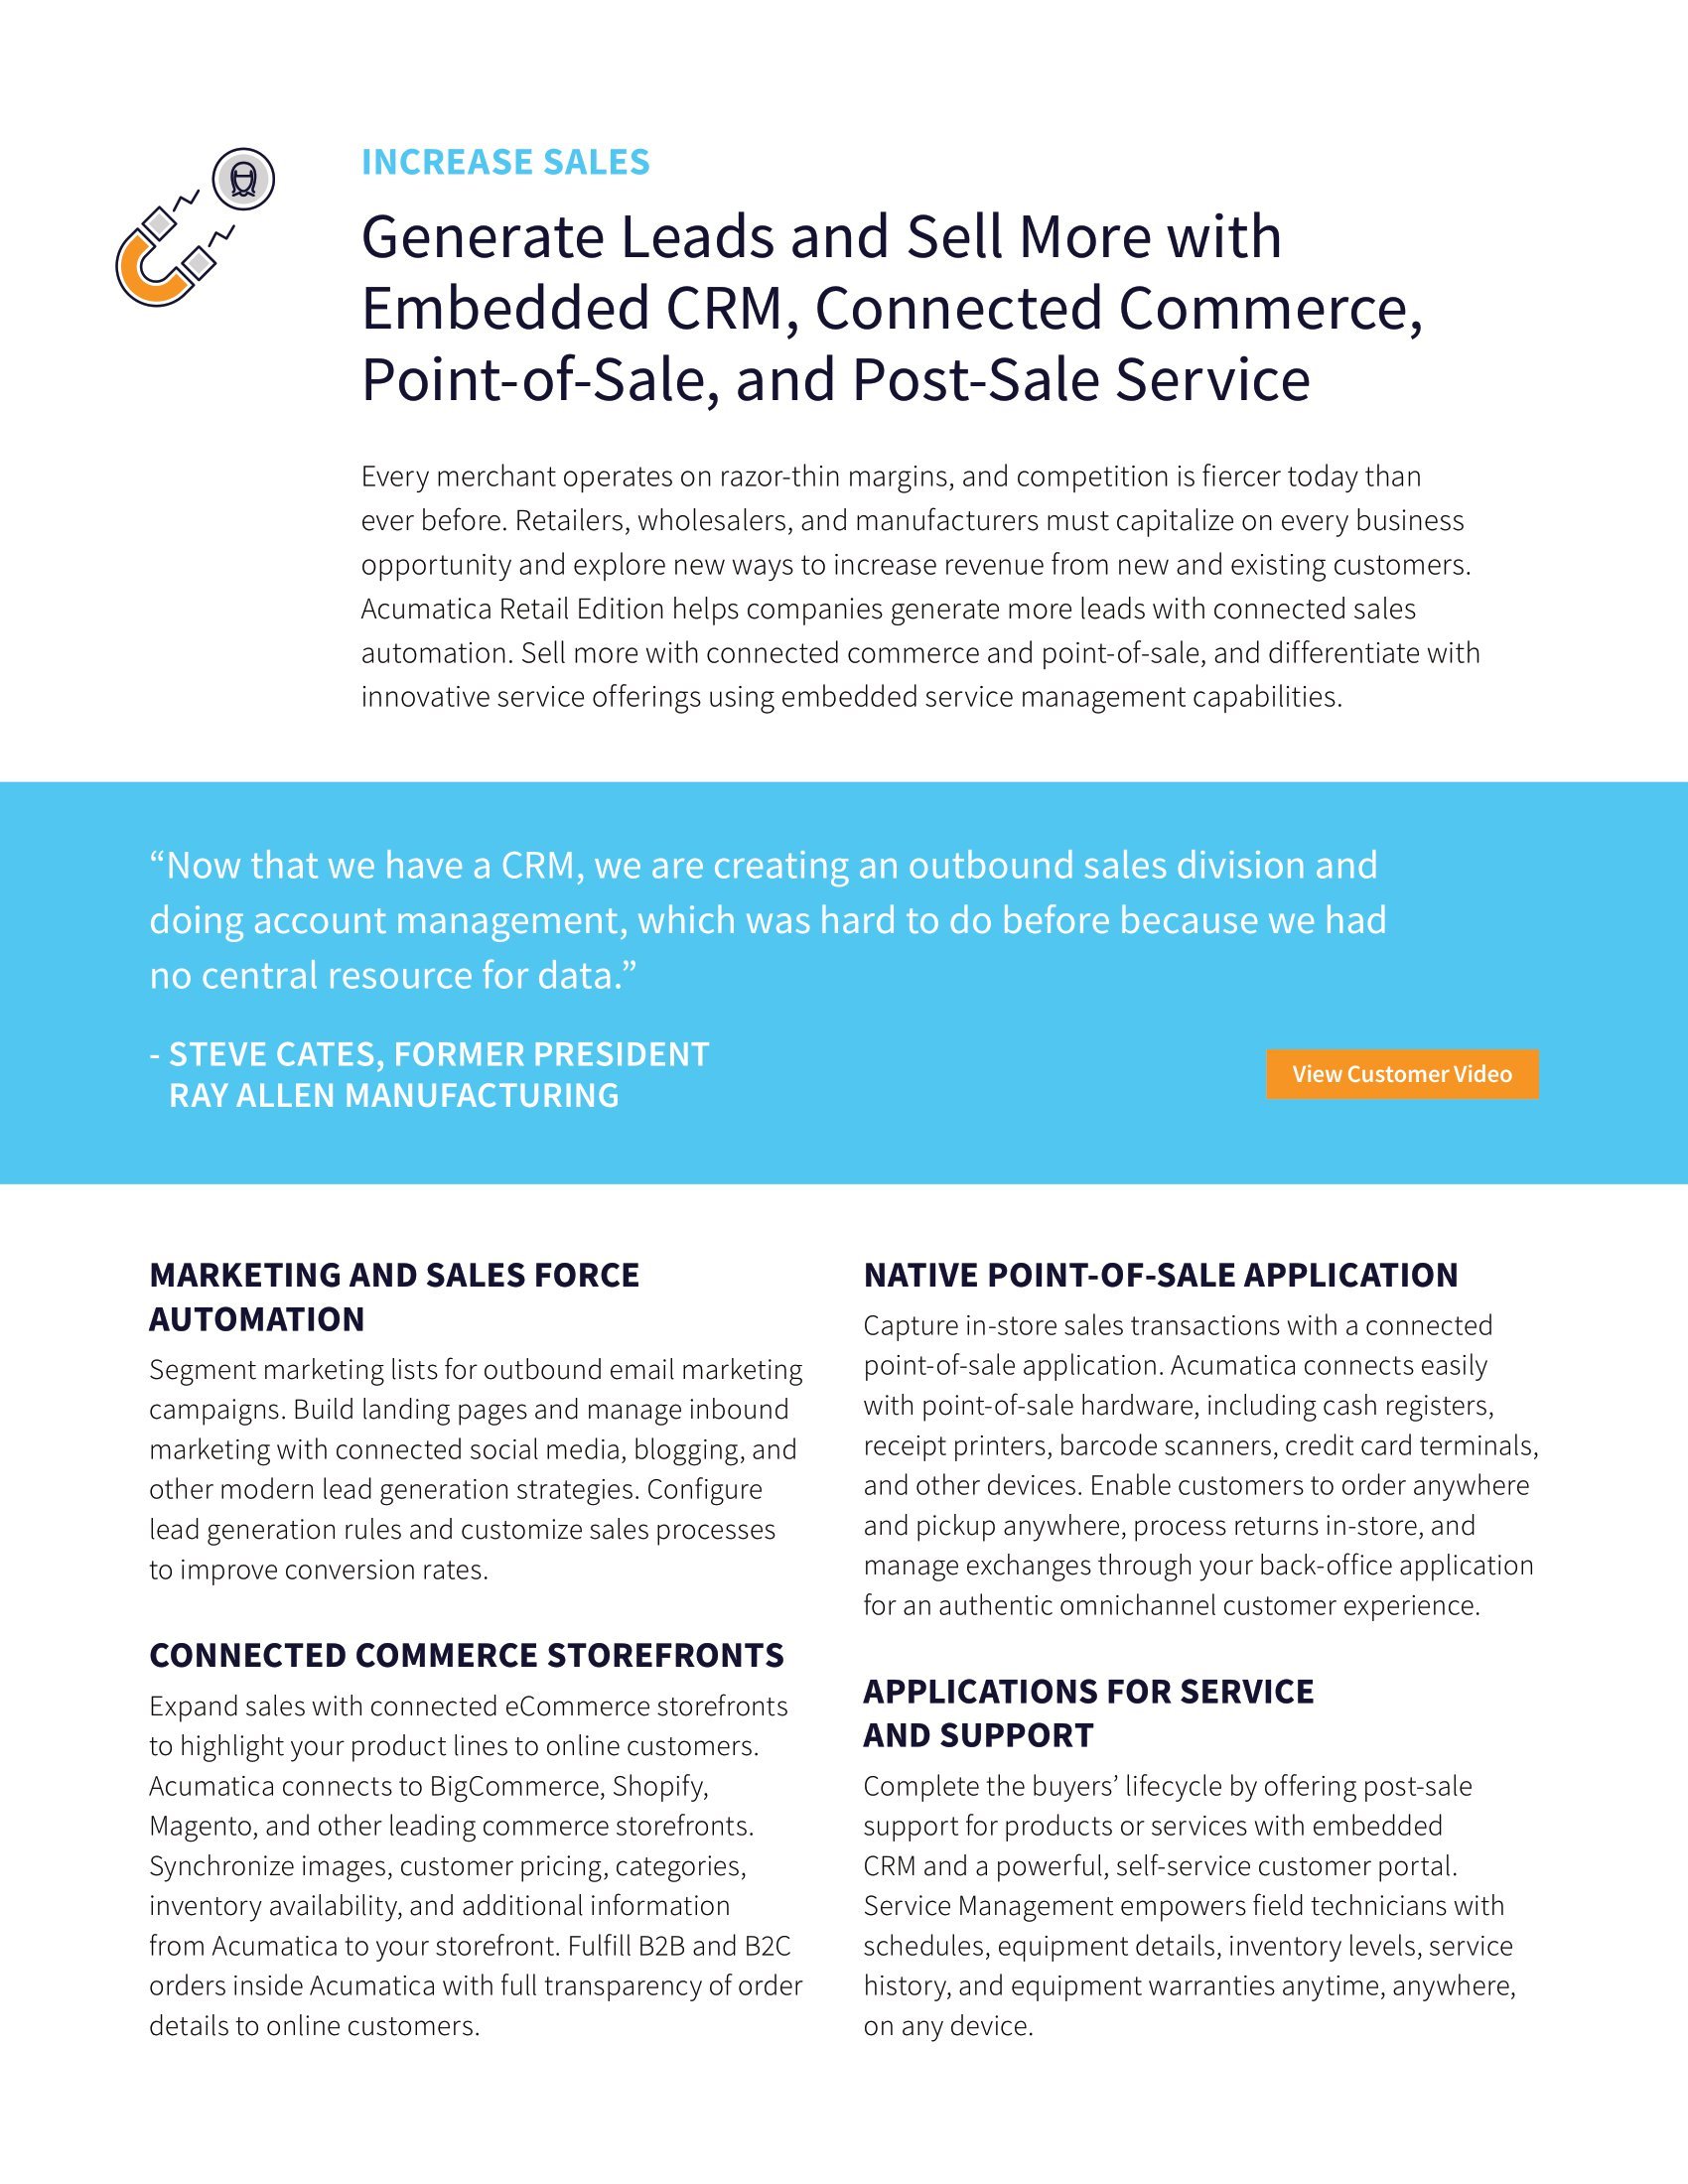 Powerful Growth for Retailers and eCommerce Companies with Acumatica’s Complete ERP Solution, page 1